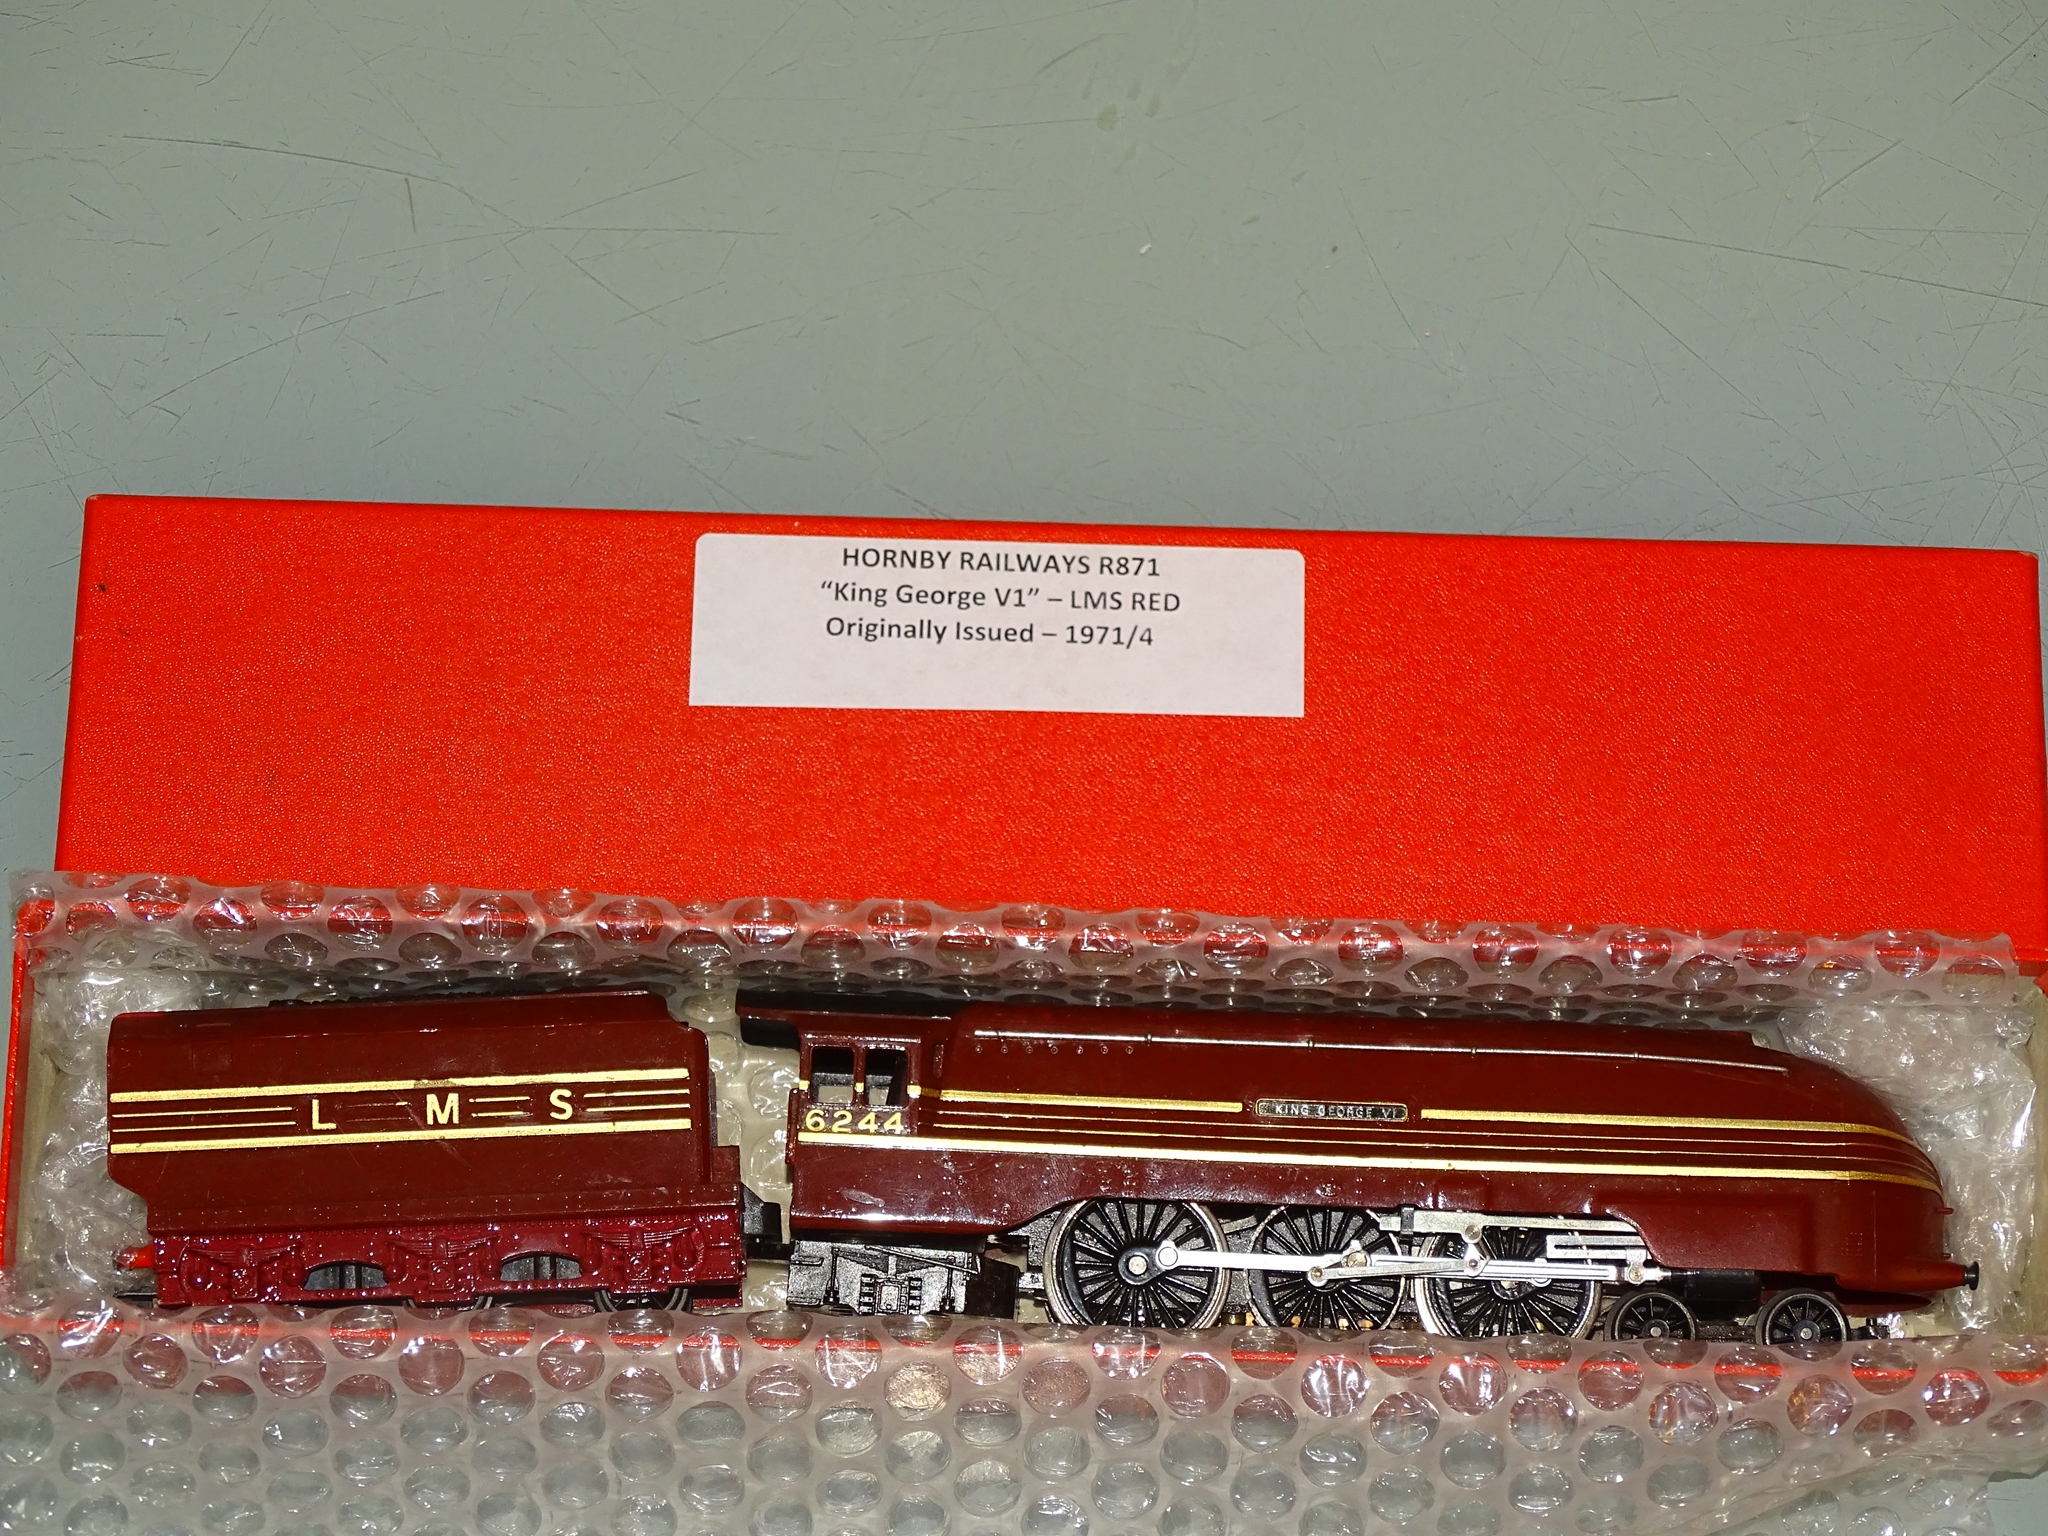 A HORNBY RAILWAYS R871 Coronation Class steam loco in LMS red 'King George VI - F/G in collector's